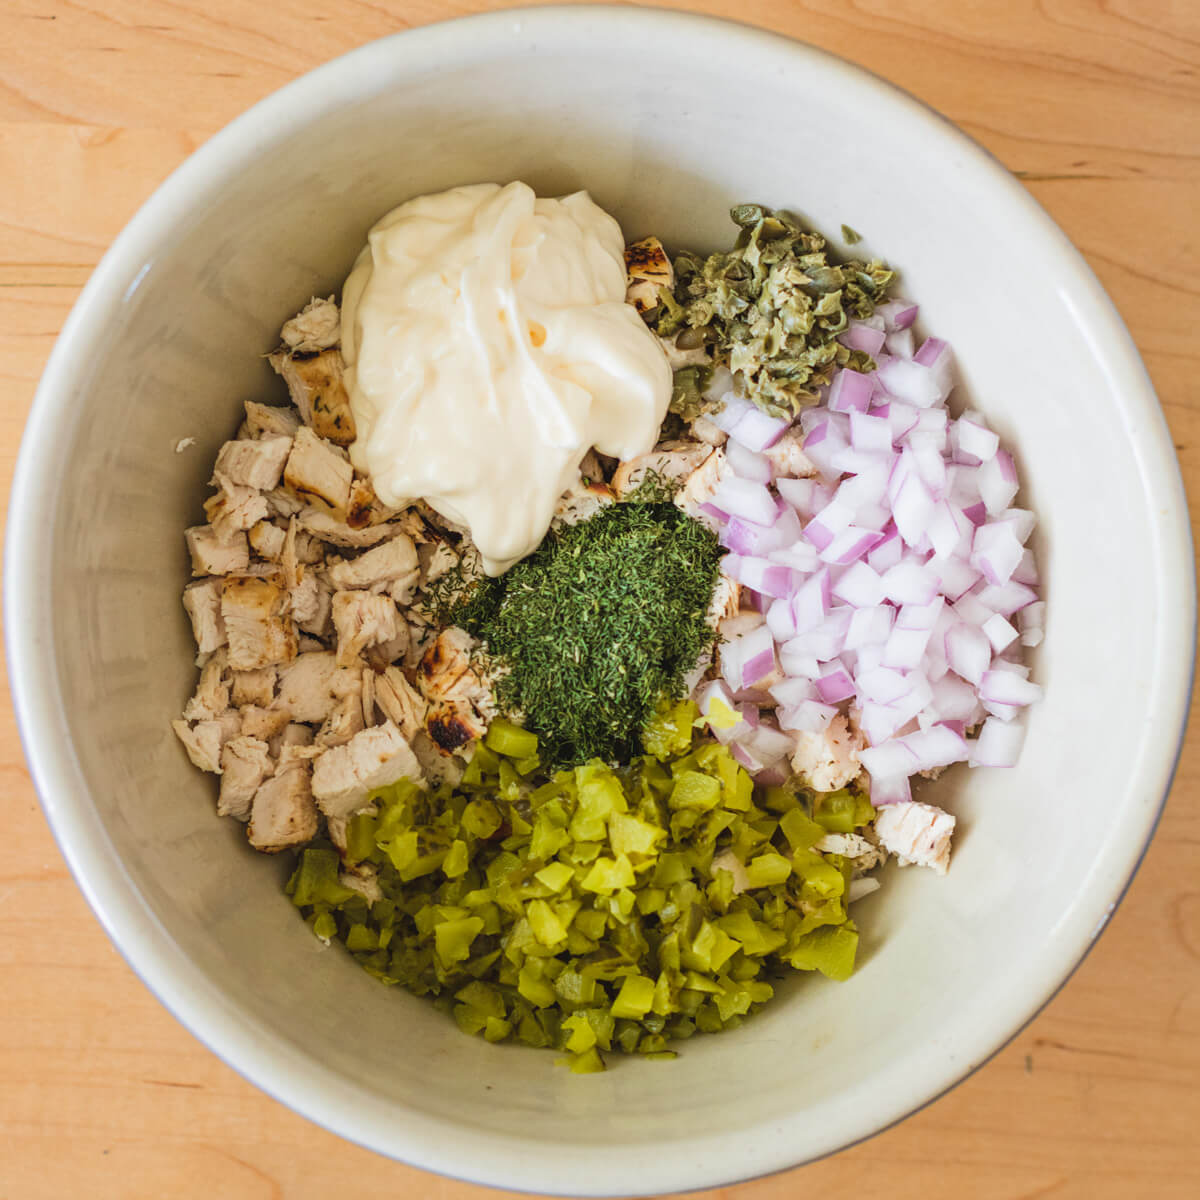 A bowl containing all of the ingredients for Dill Pickle Chicken Egg Salad before they are mixed together.